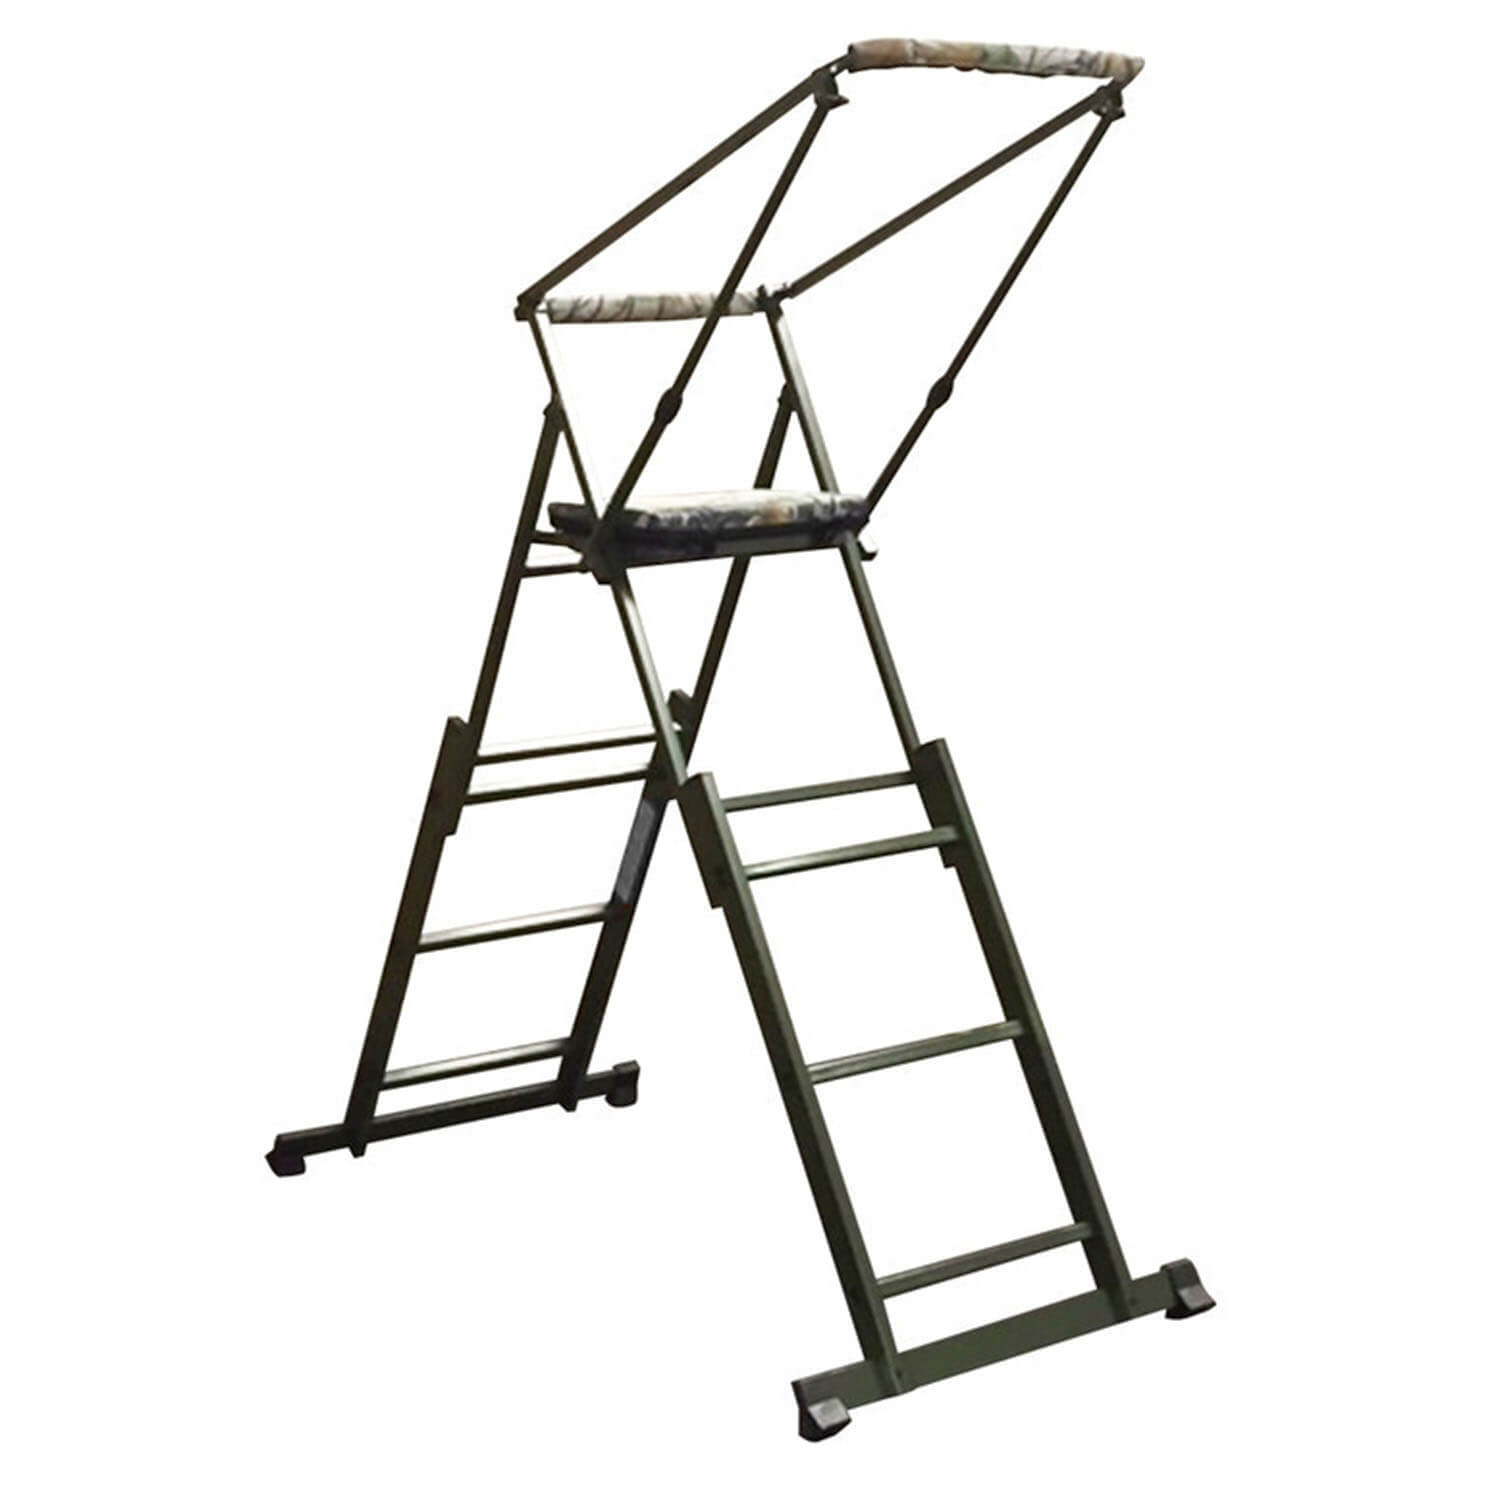 Farm-Land hunting ladder mobile stand - Wild Boar Hunting